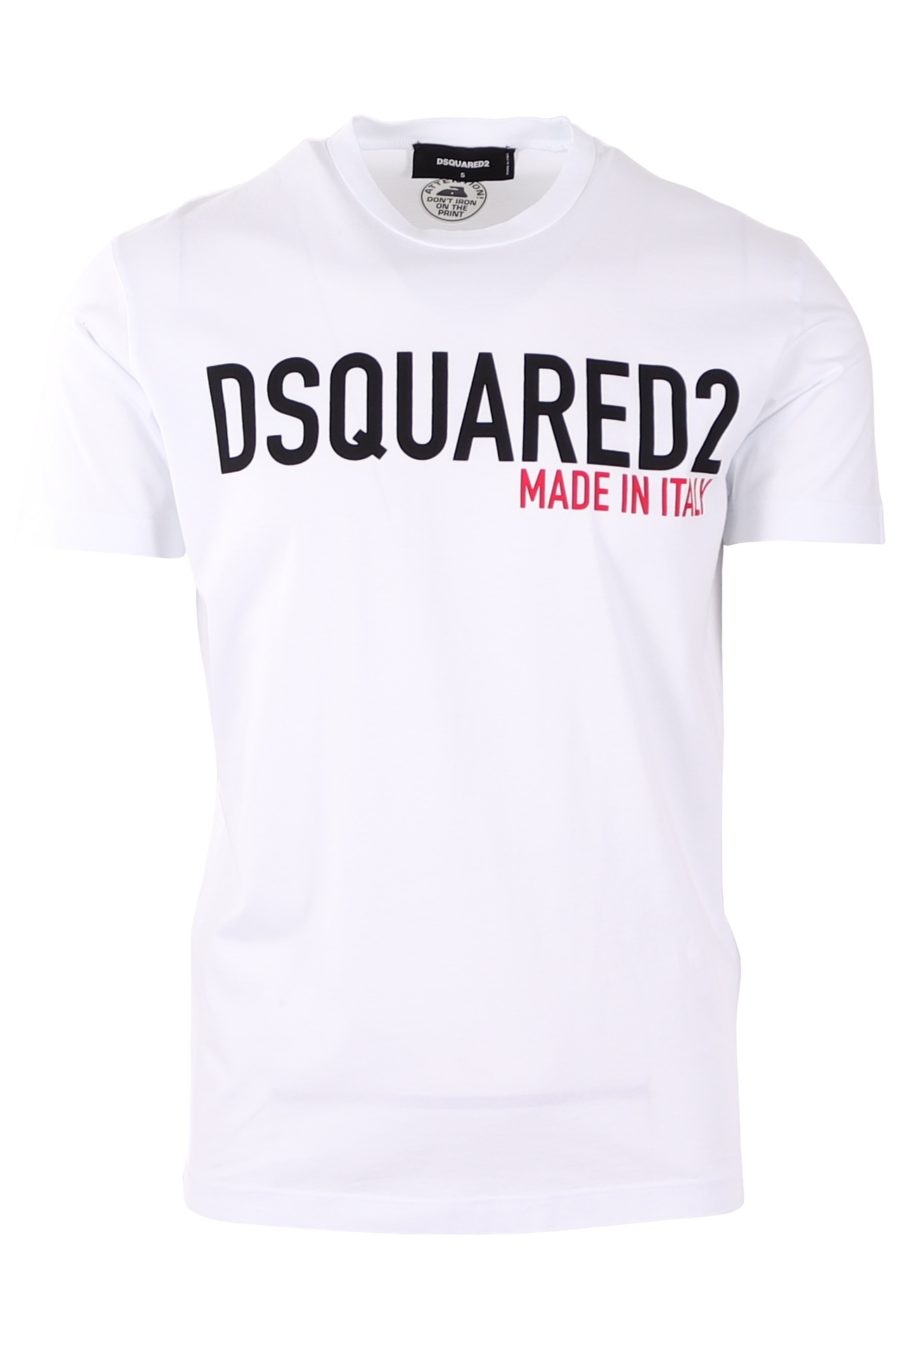 T-shirt Dsquared2 blanc logo noir made in italy - e7702cefc29715977d70494c66043222ae45d7f4